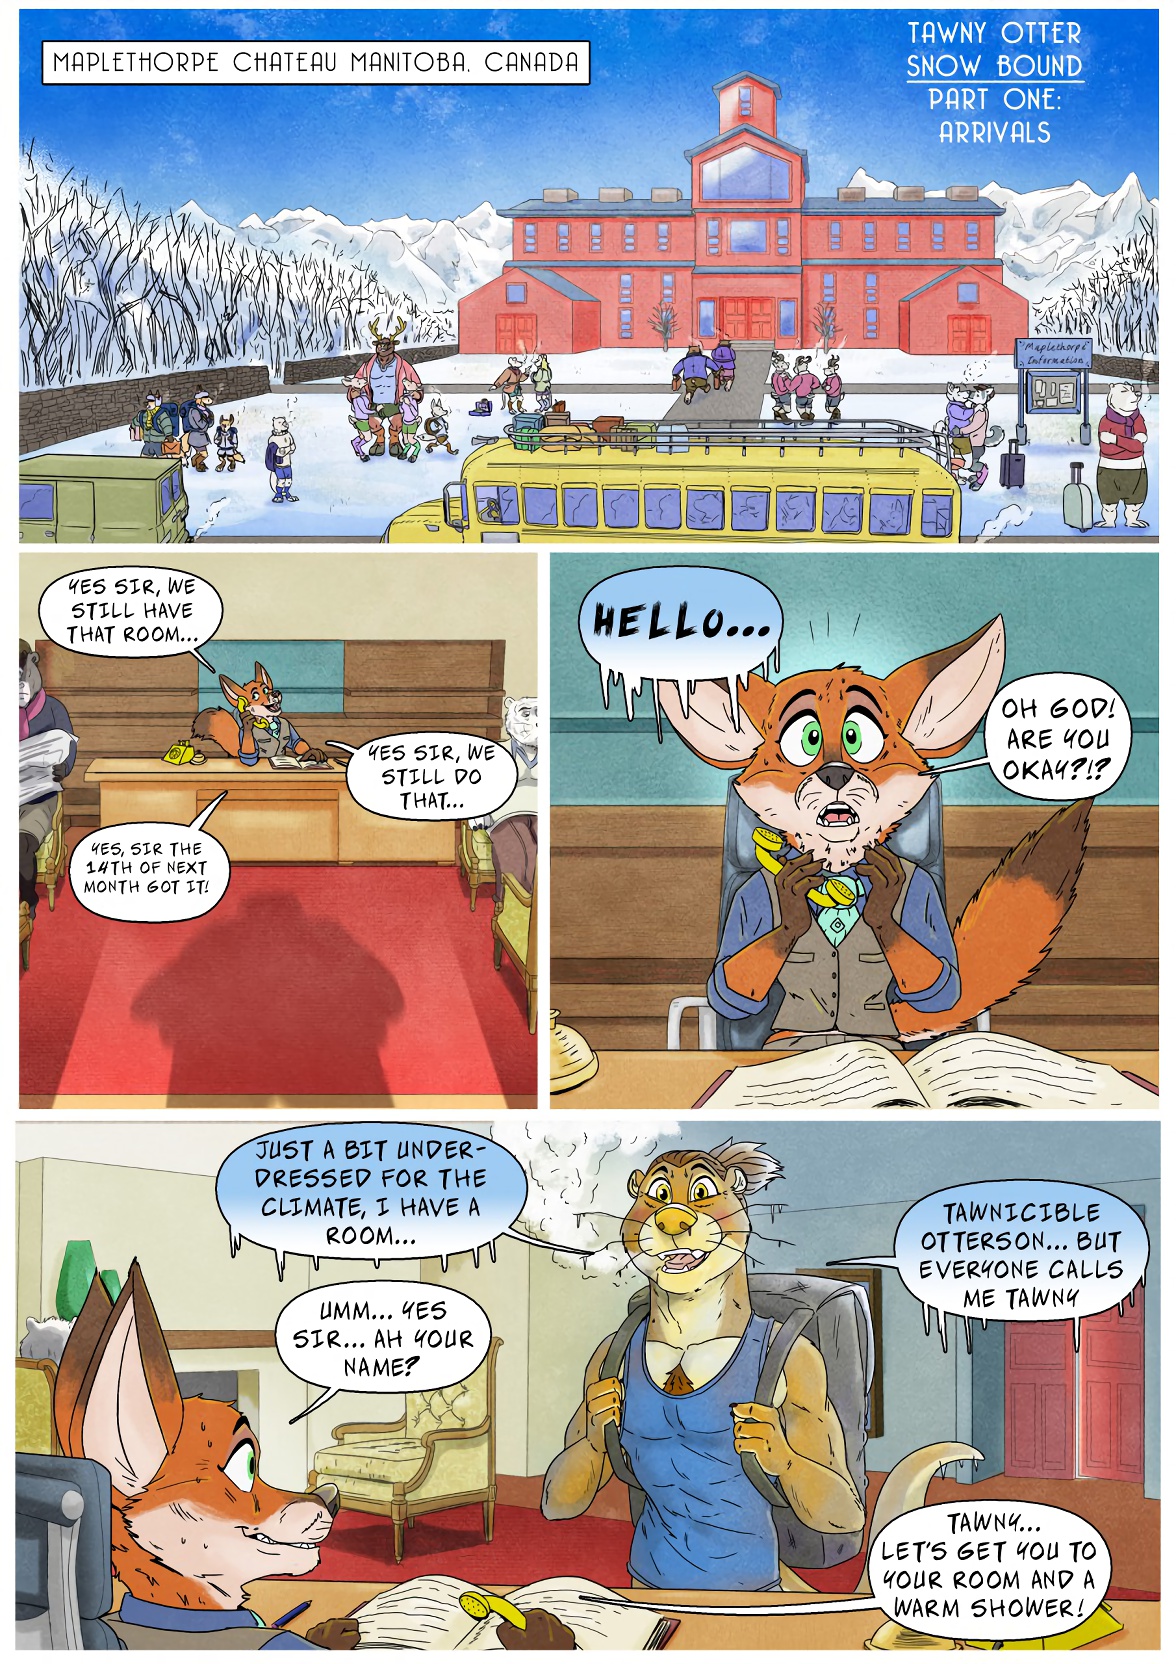 Snow Bound (tawny otter) 31 images. Furry porn comics.